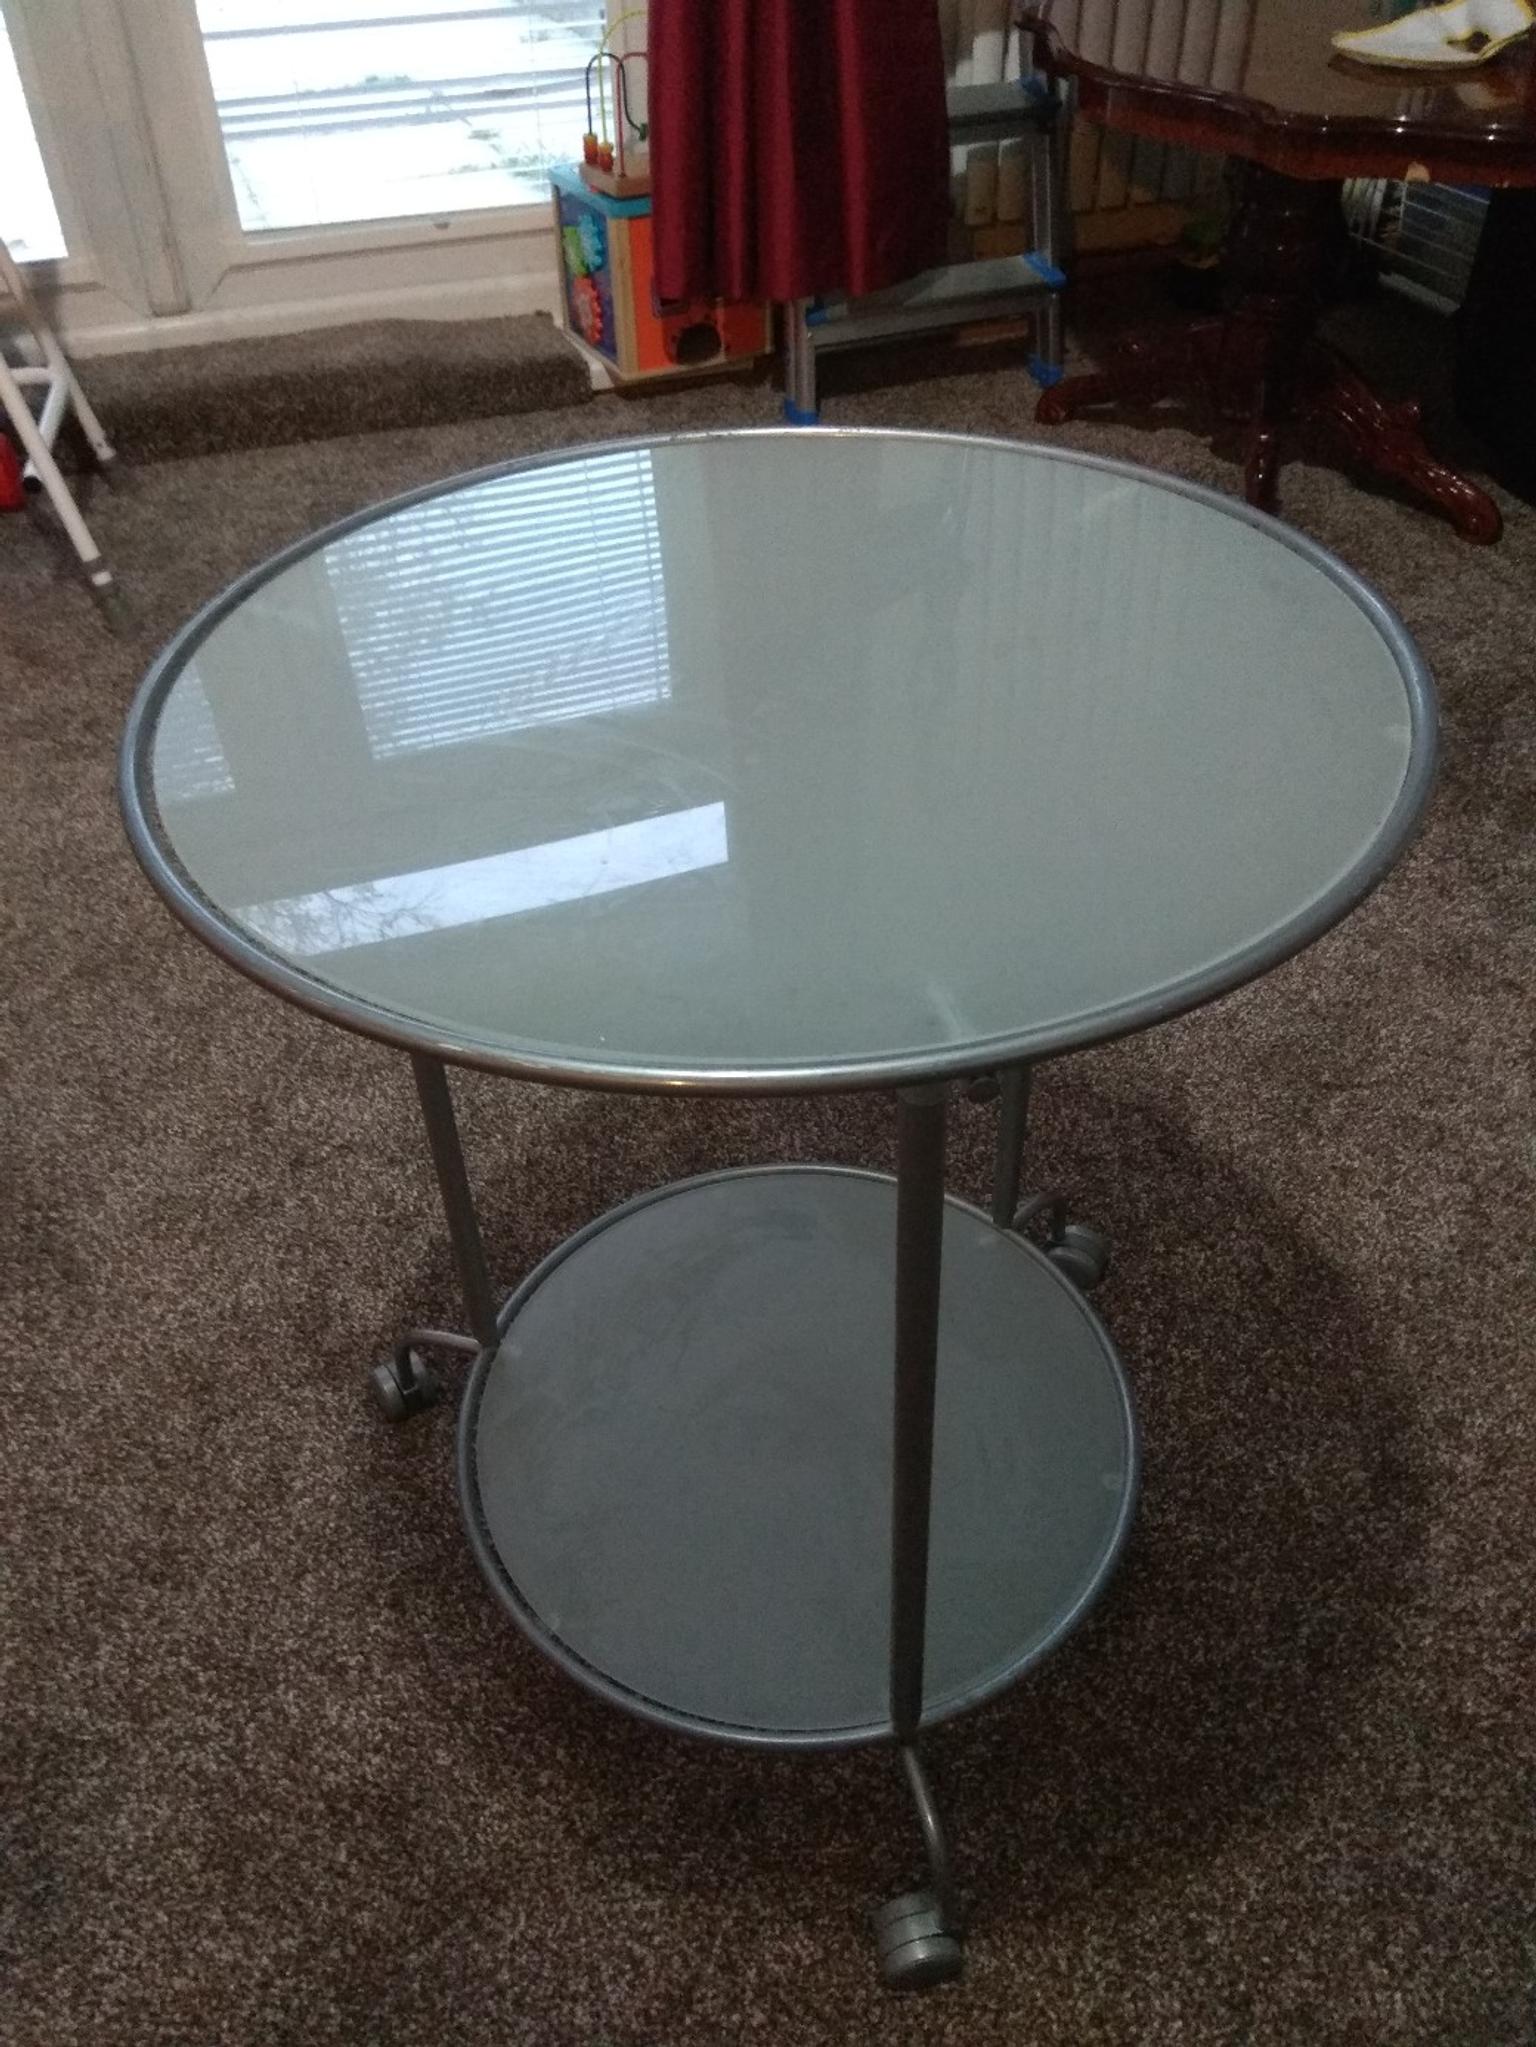 Two Tier Glass Coffee Table In Bl3 Bolton Fur 15 00 Zum Verkauf Shpock At